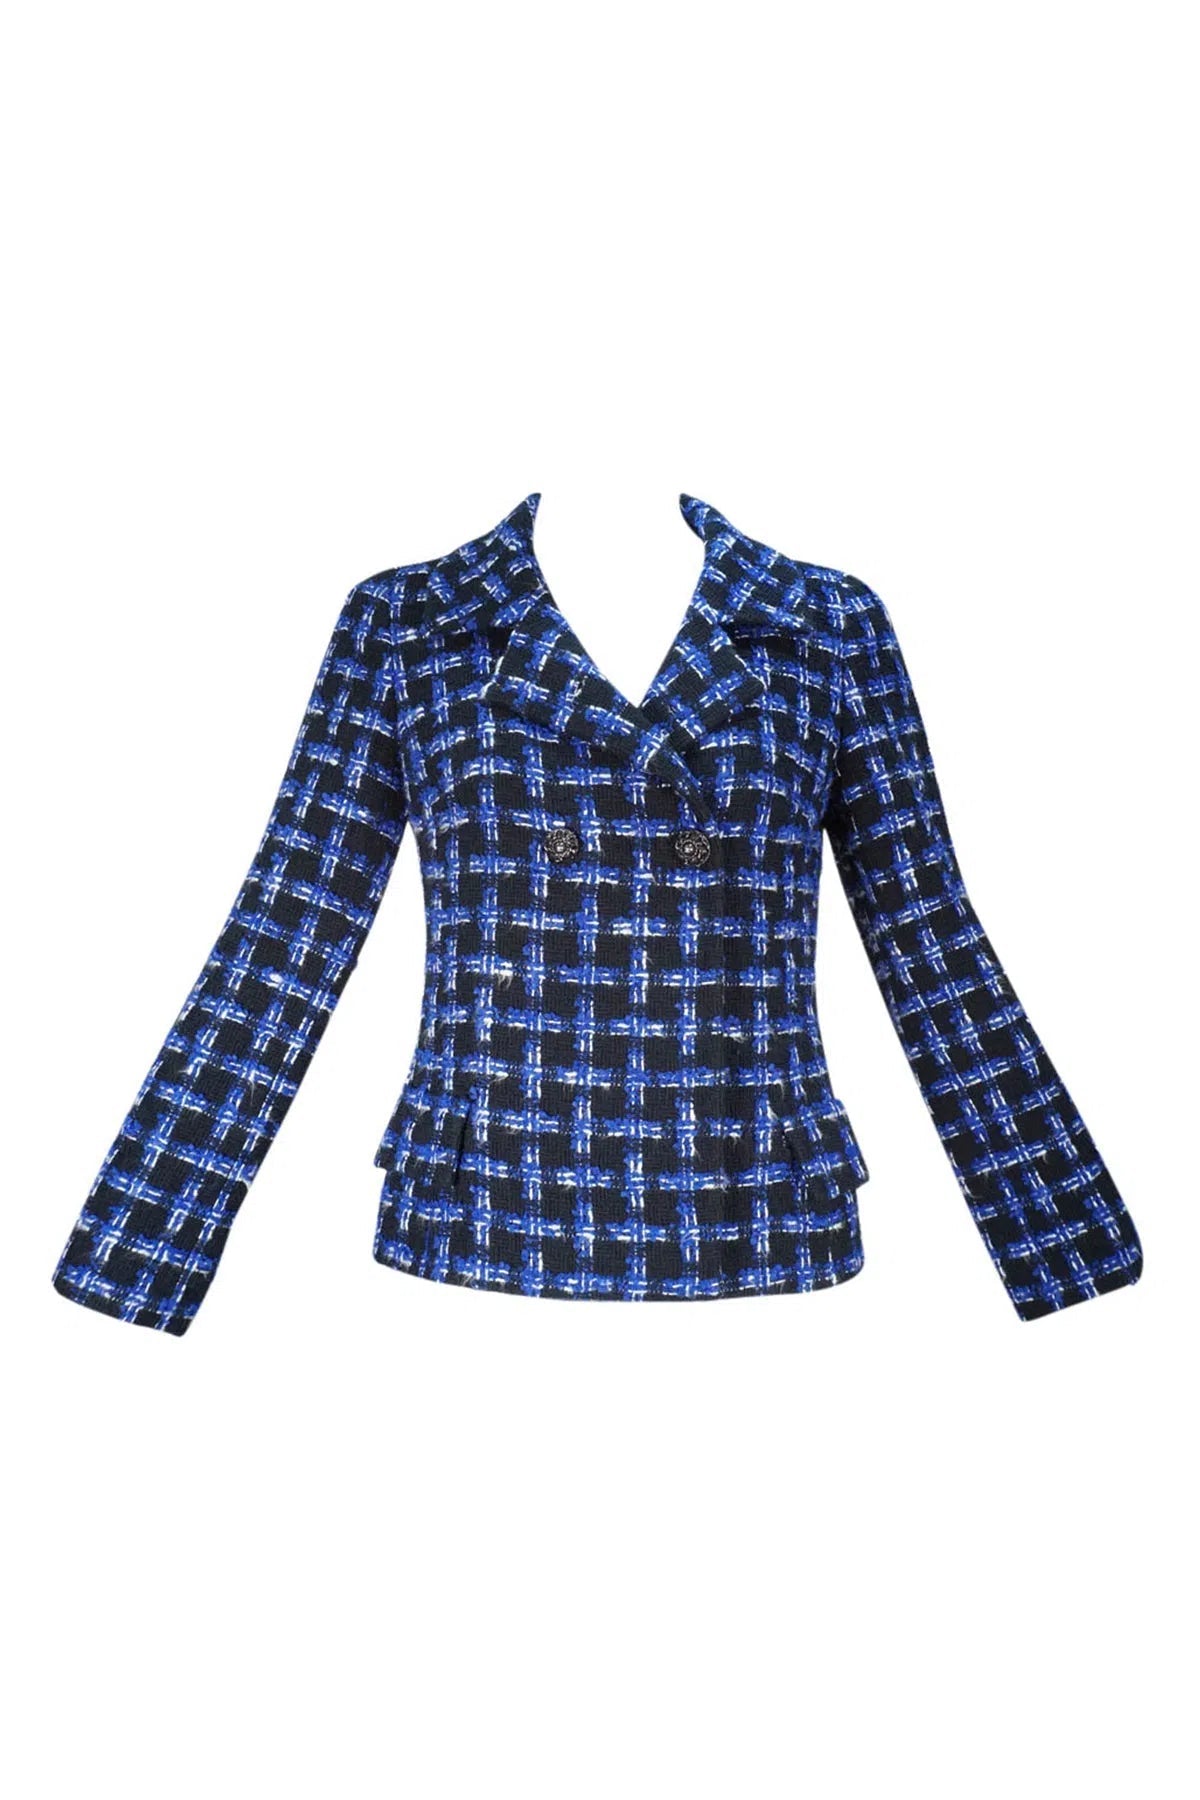 Chanel Blue and Black Tweed Two Button Jacket Size 38 - Foxy Couture Carmel